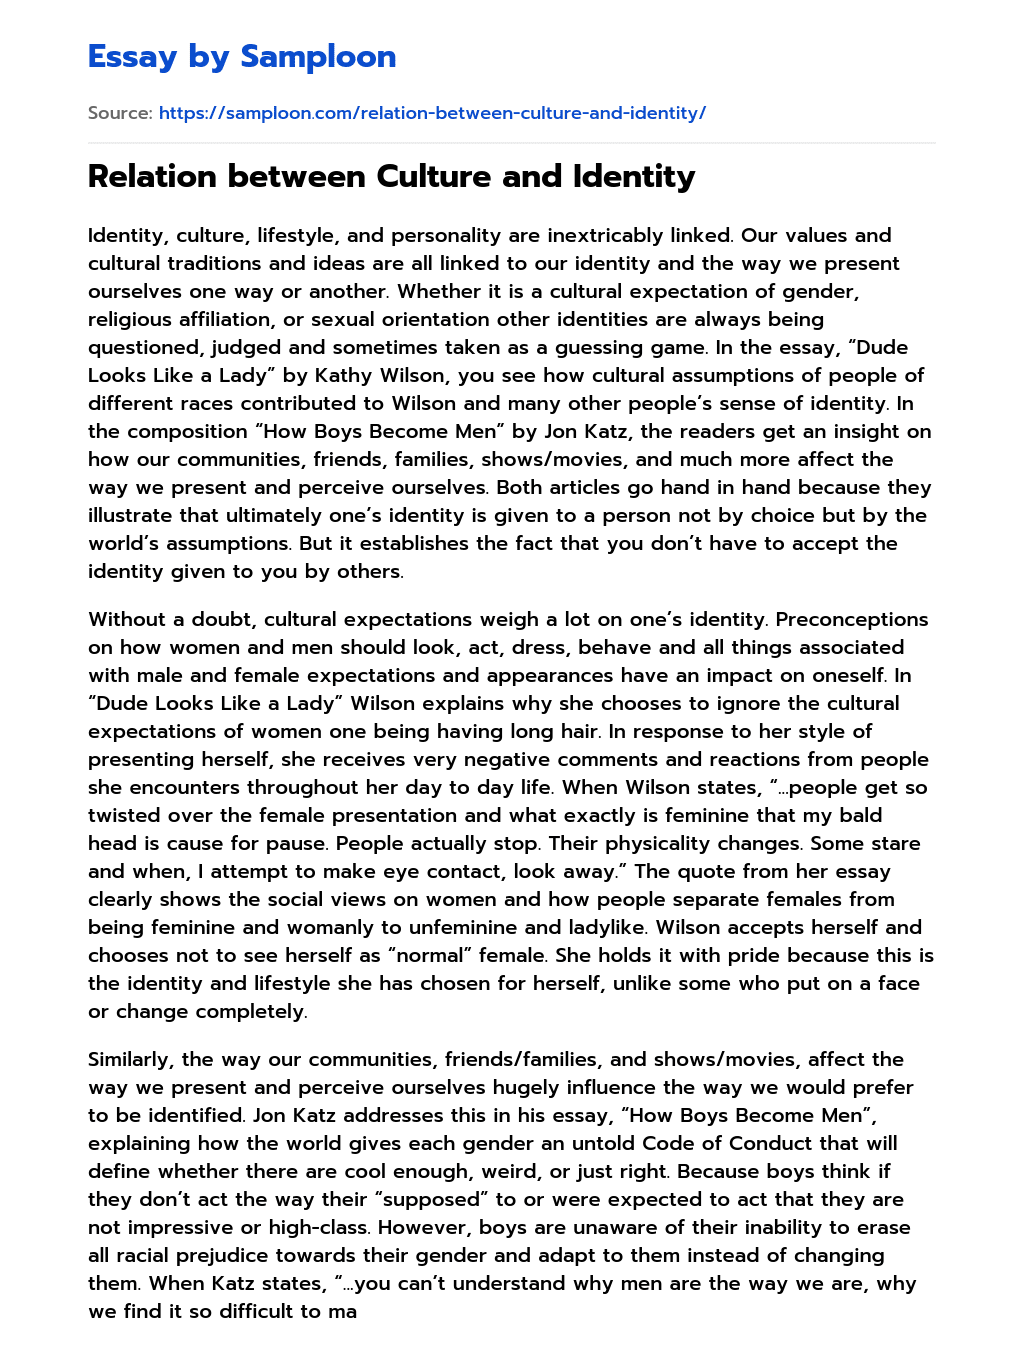 Relation between Culture and Identity essay